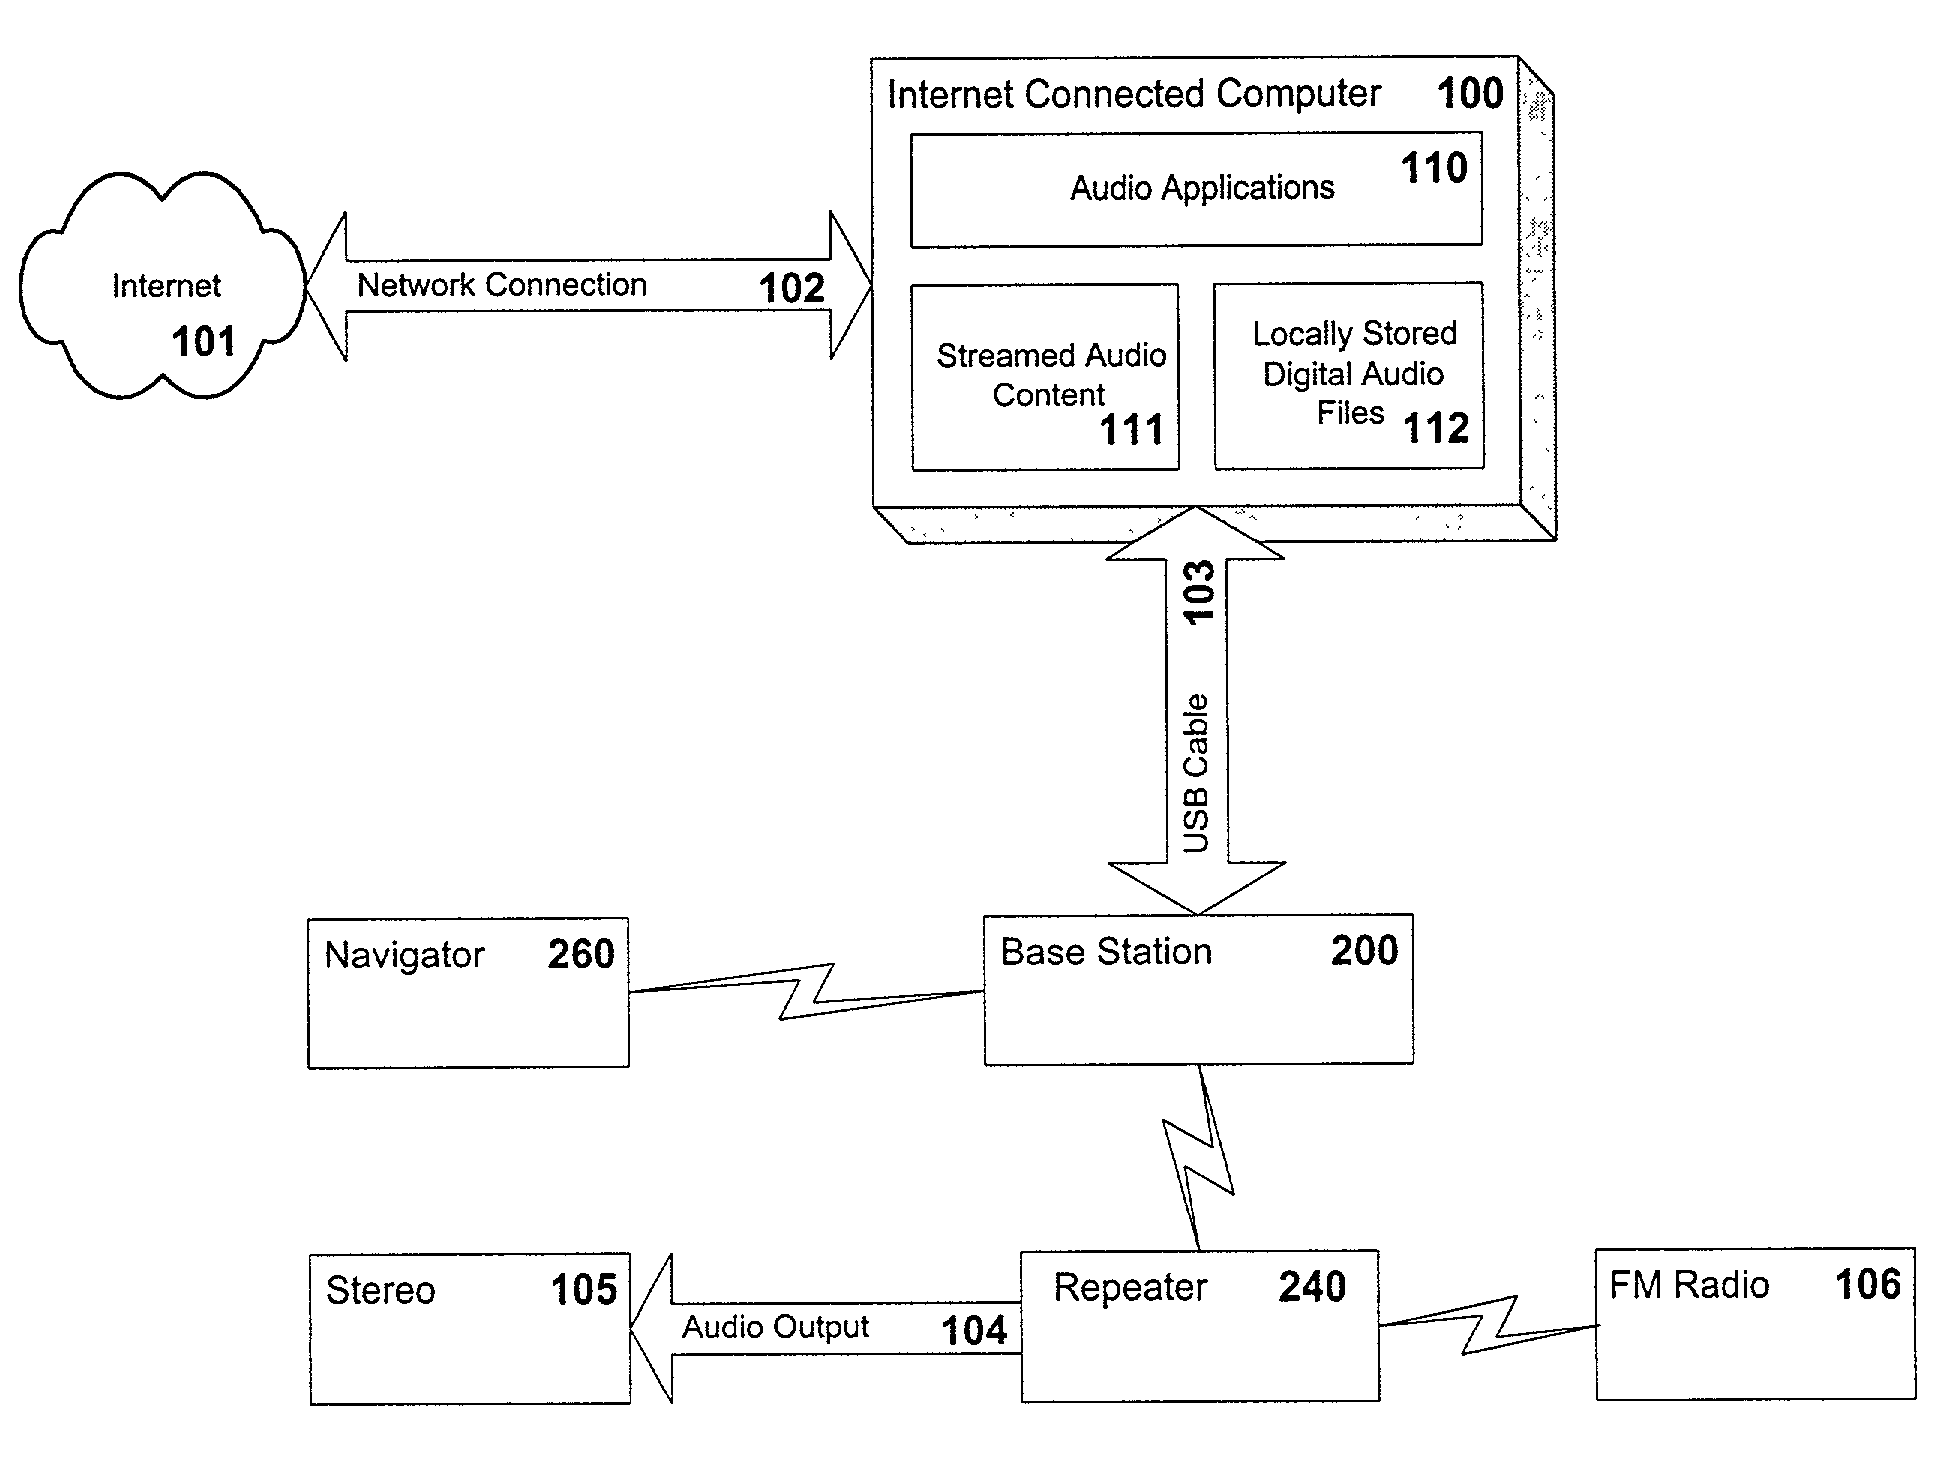 Structure and method for selecting, controlling and sending internet-based or local digital audio to an AM/FM radio or analog amplifier